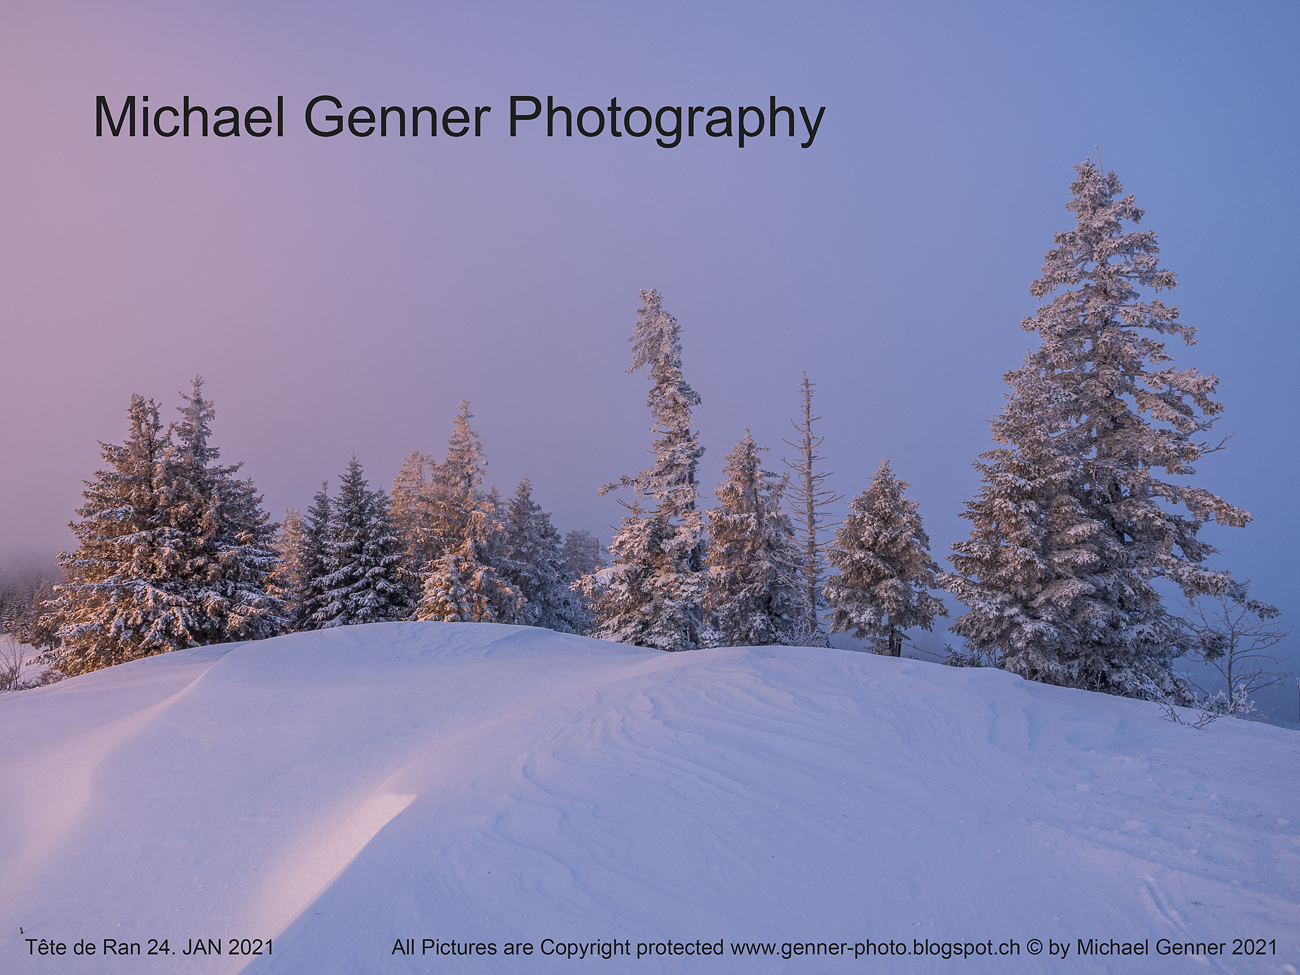 Michael Genner Photography